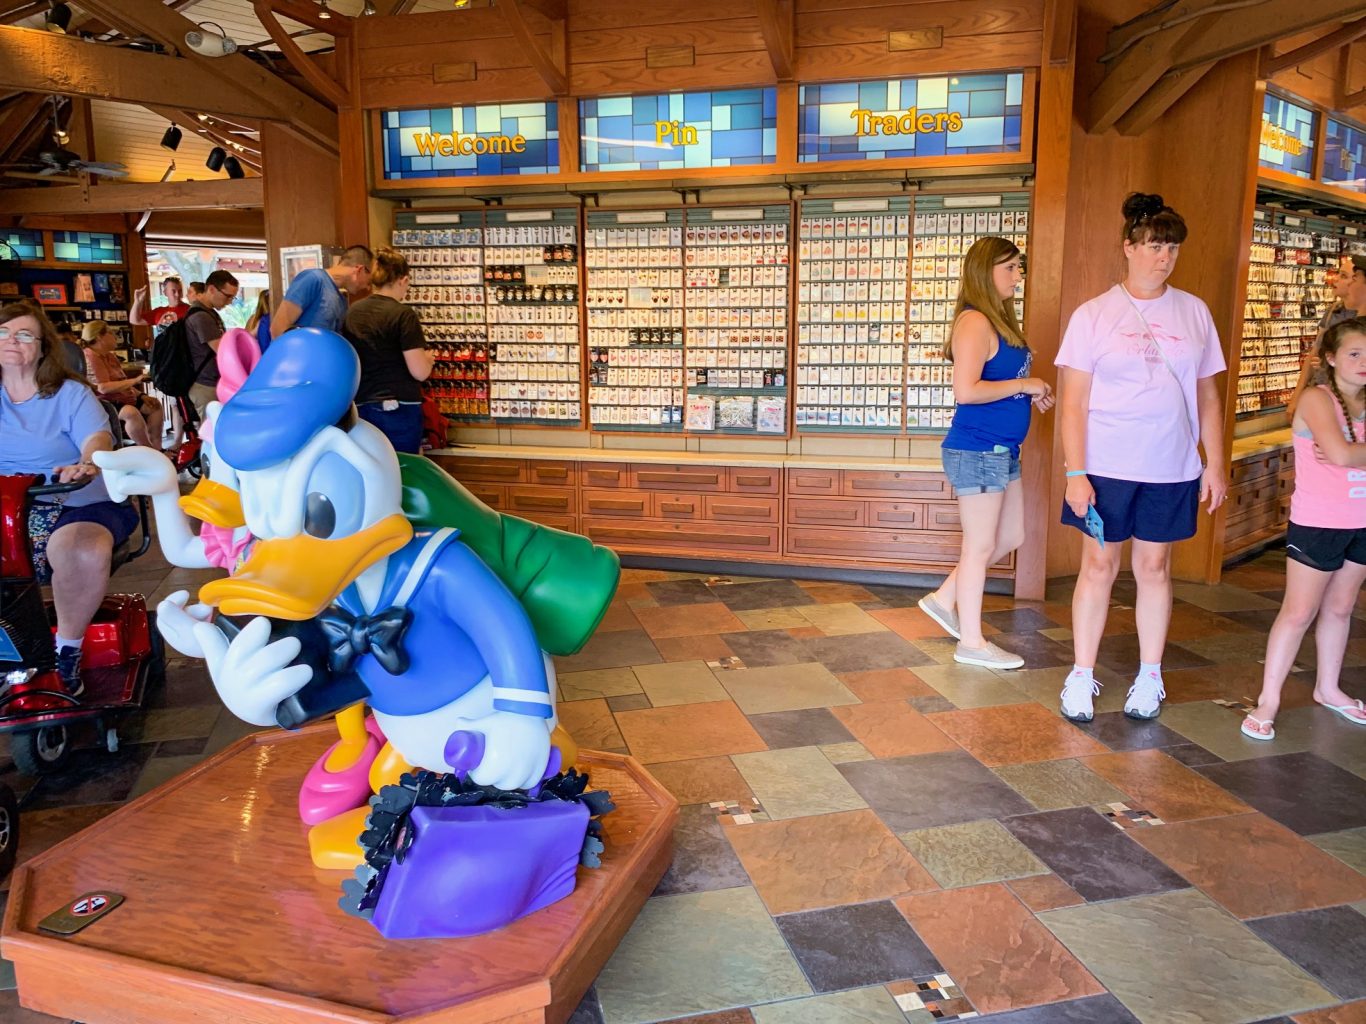 Donald Duck statue in front of wall of pins